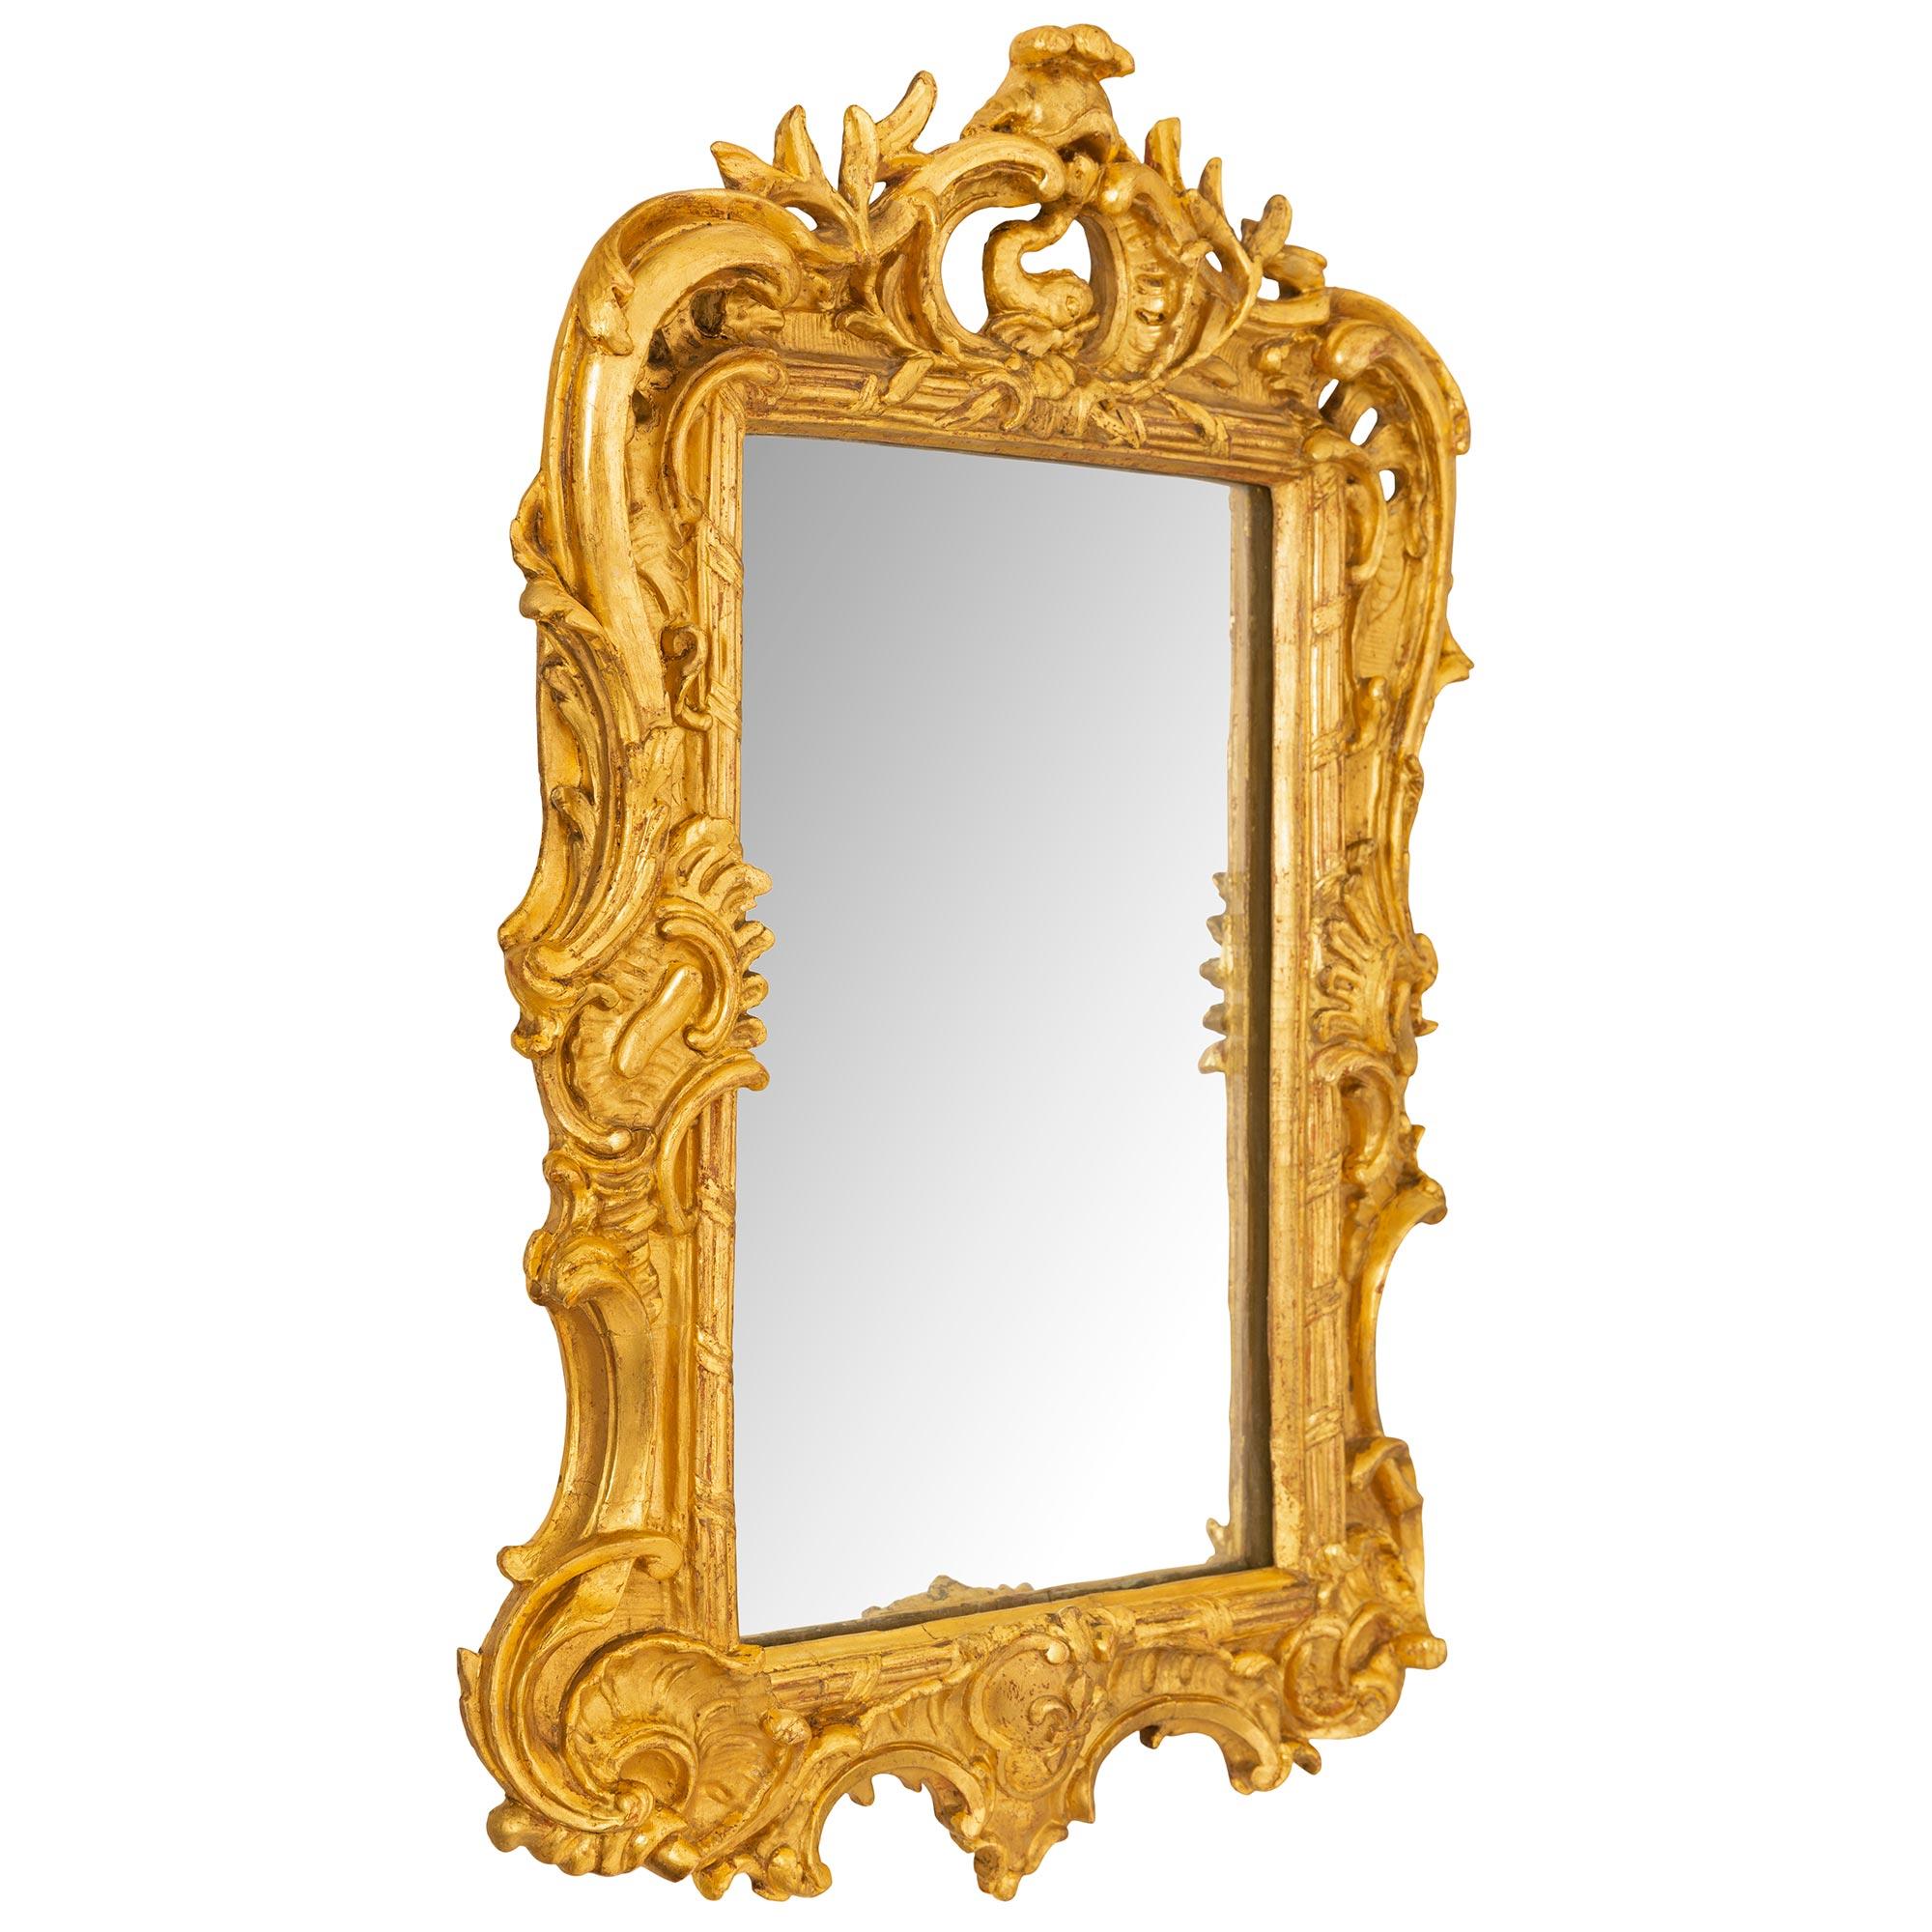 French Mid 18th Century Louis XV Period Giltwood Mirror In Good Condition For Sale In West Palm Beach, FL